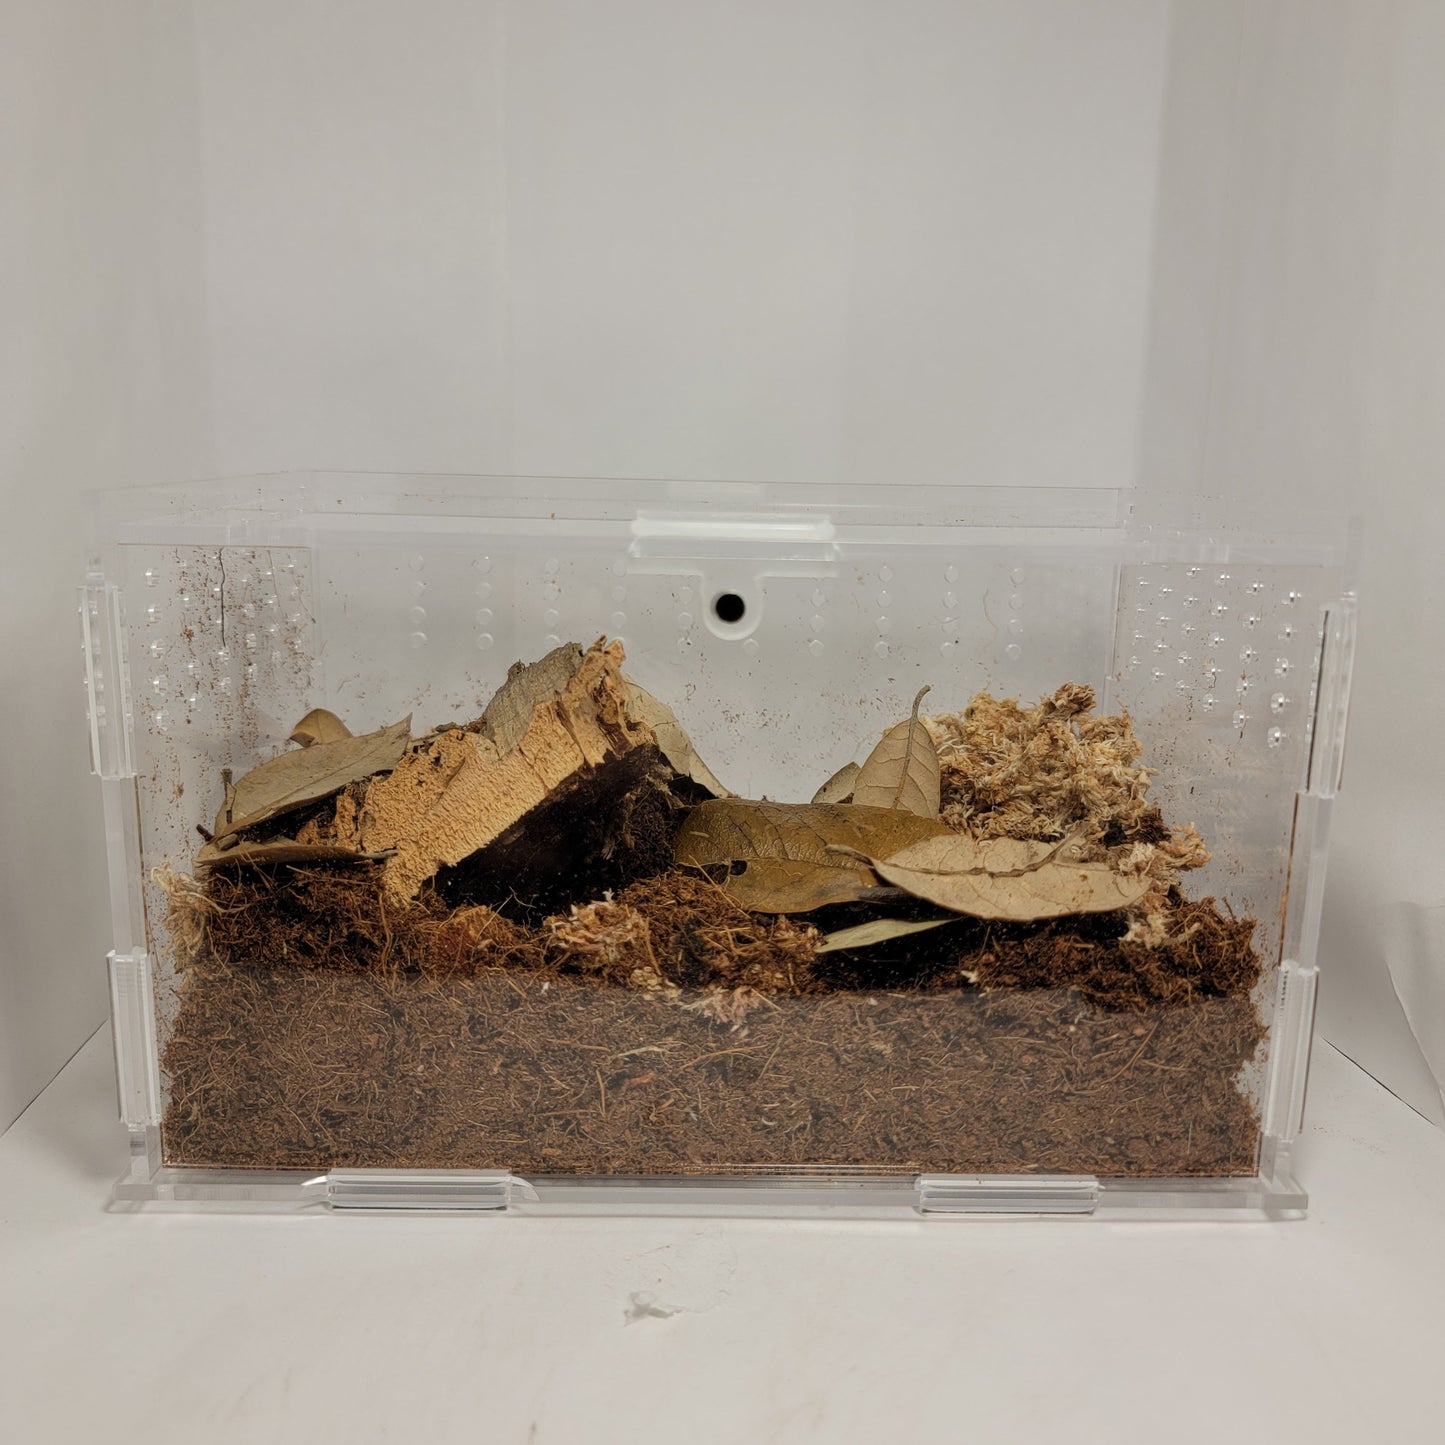 Top Opening Terrestrial Kit | Enclosure Kit For Tarantula | Baby Spiders | Millipede | Centipede | Isopods | The Critters Cave